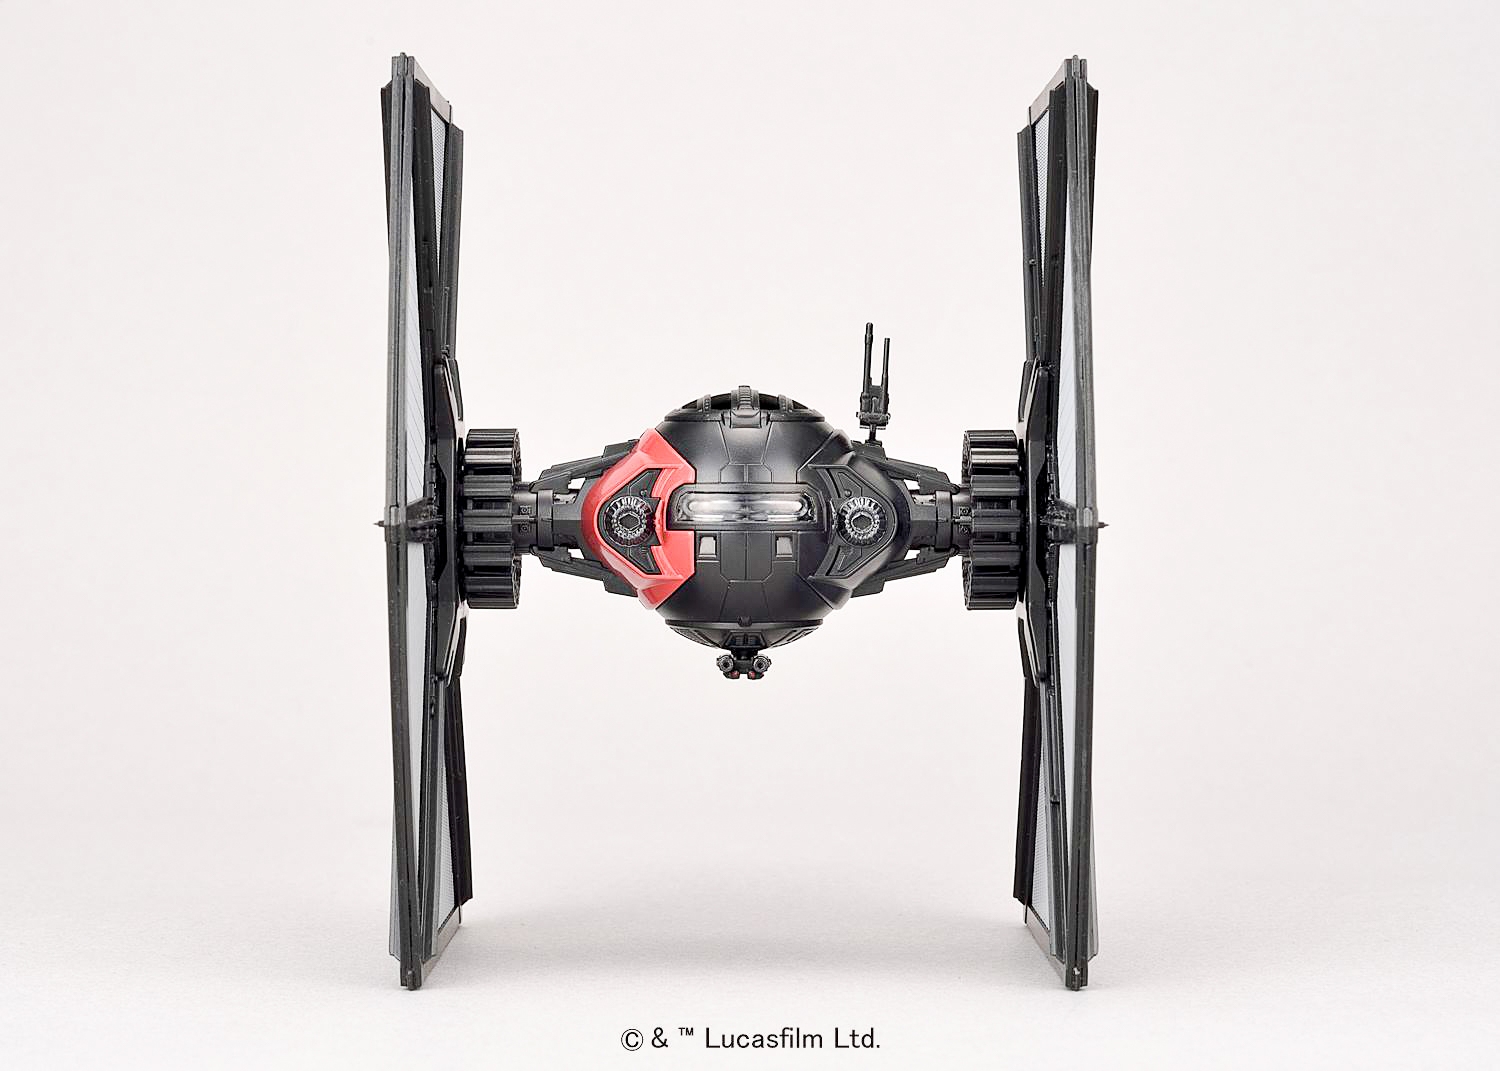 Bandai-Hobby-First-Order-Special-Forces-TIE-Fighter-1-72-Model-004.jpg